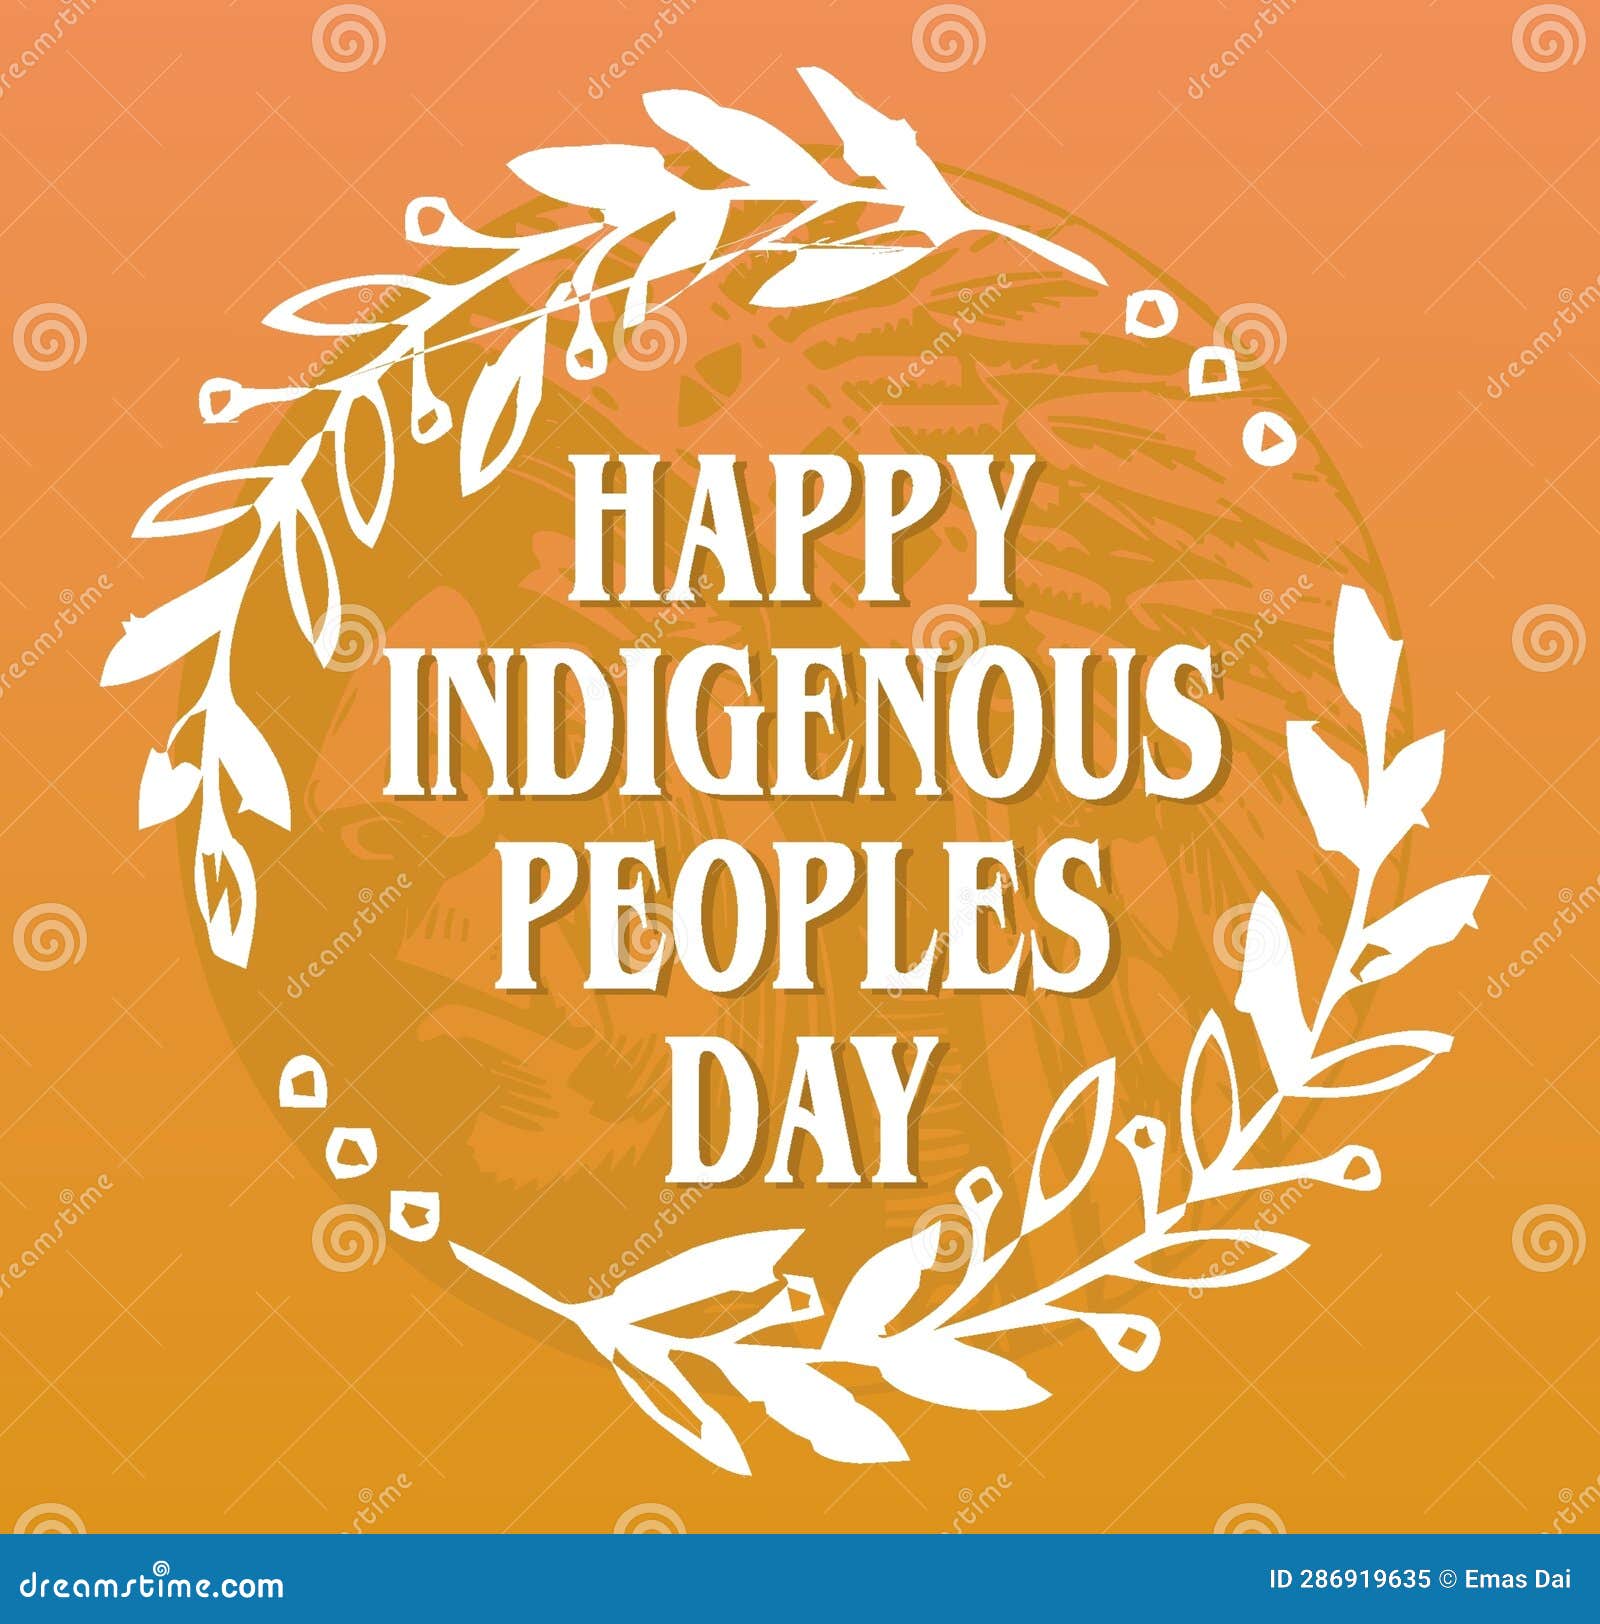 happy indigenous peoples day